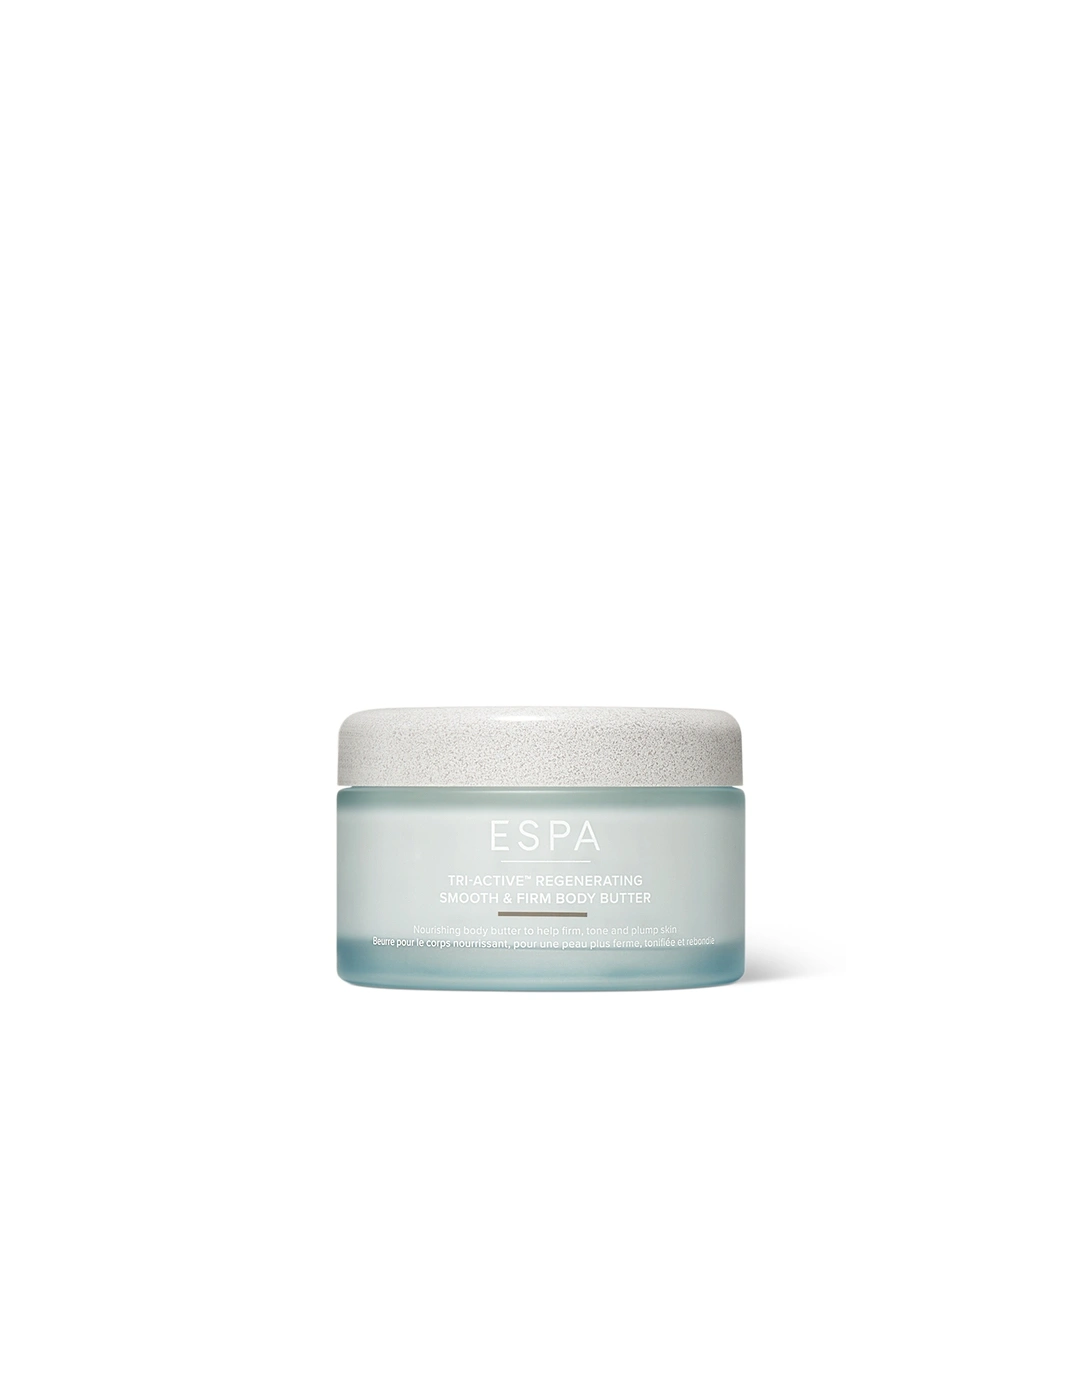 Tri Active Regenerating Smooth & Firm Body Butter, 2 of 1